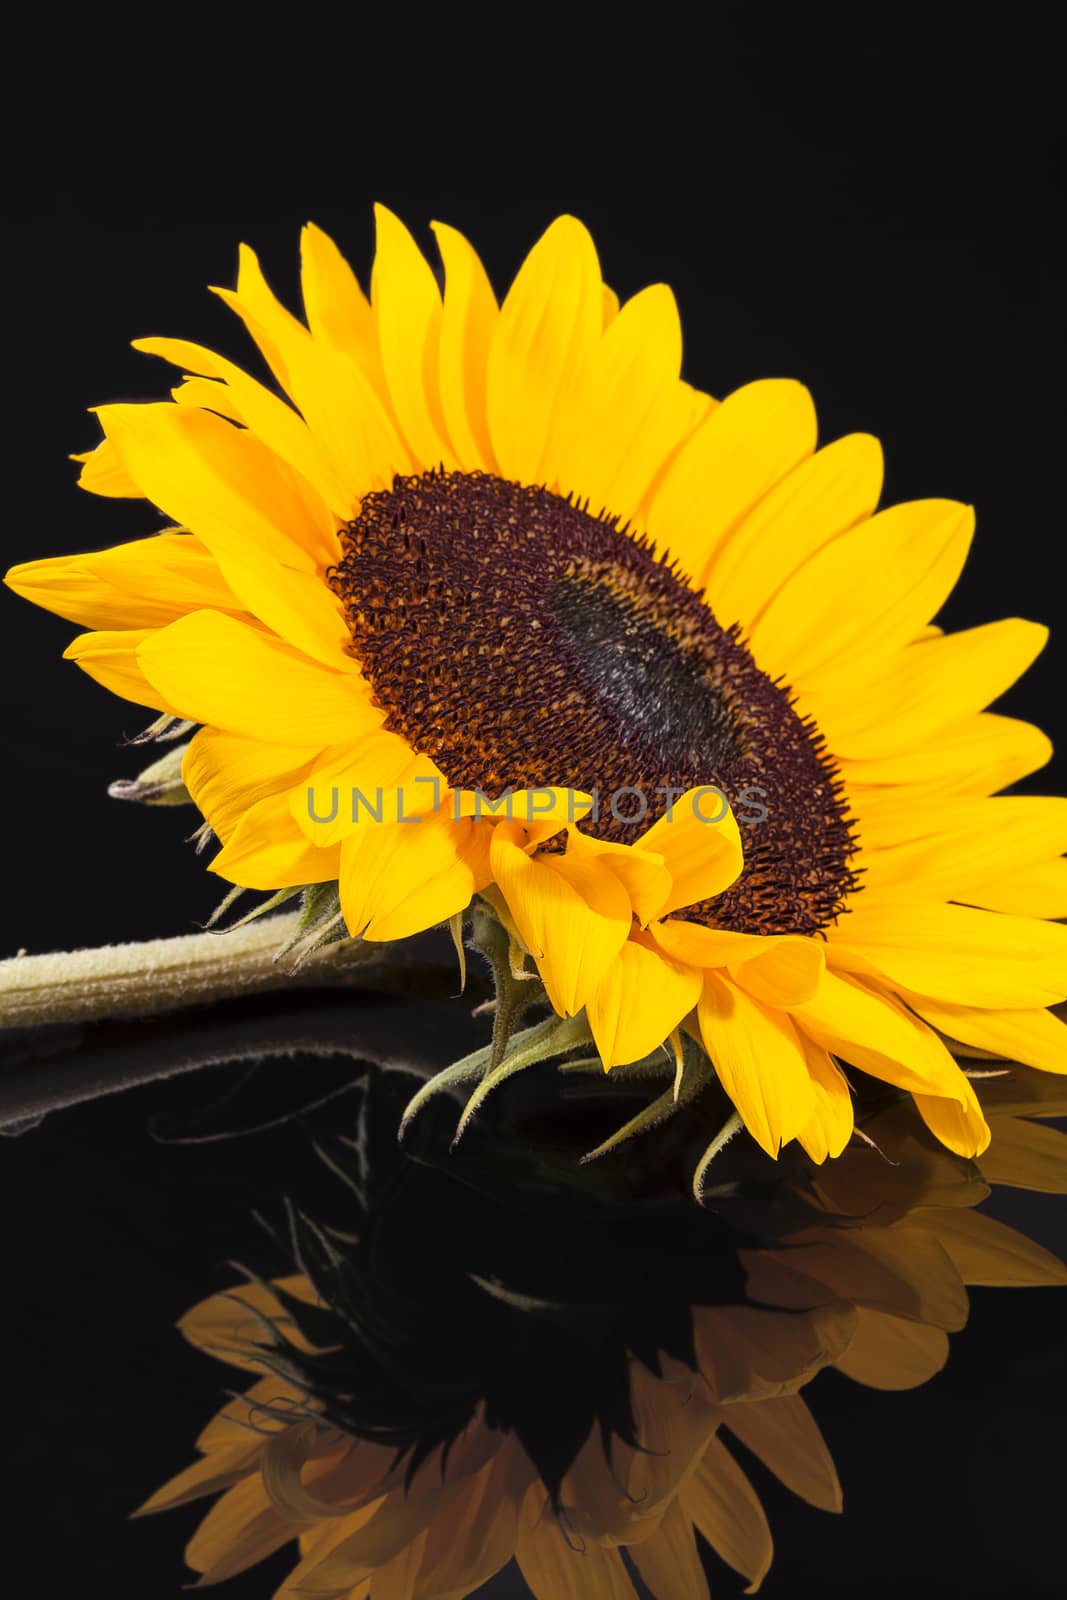 Blooming sunflower on black  background with  reflection, close up.